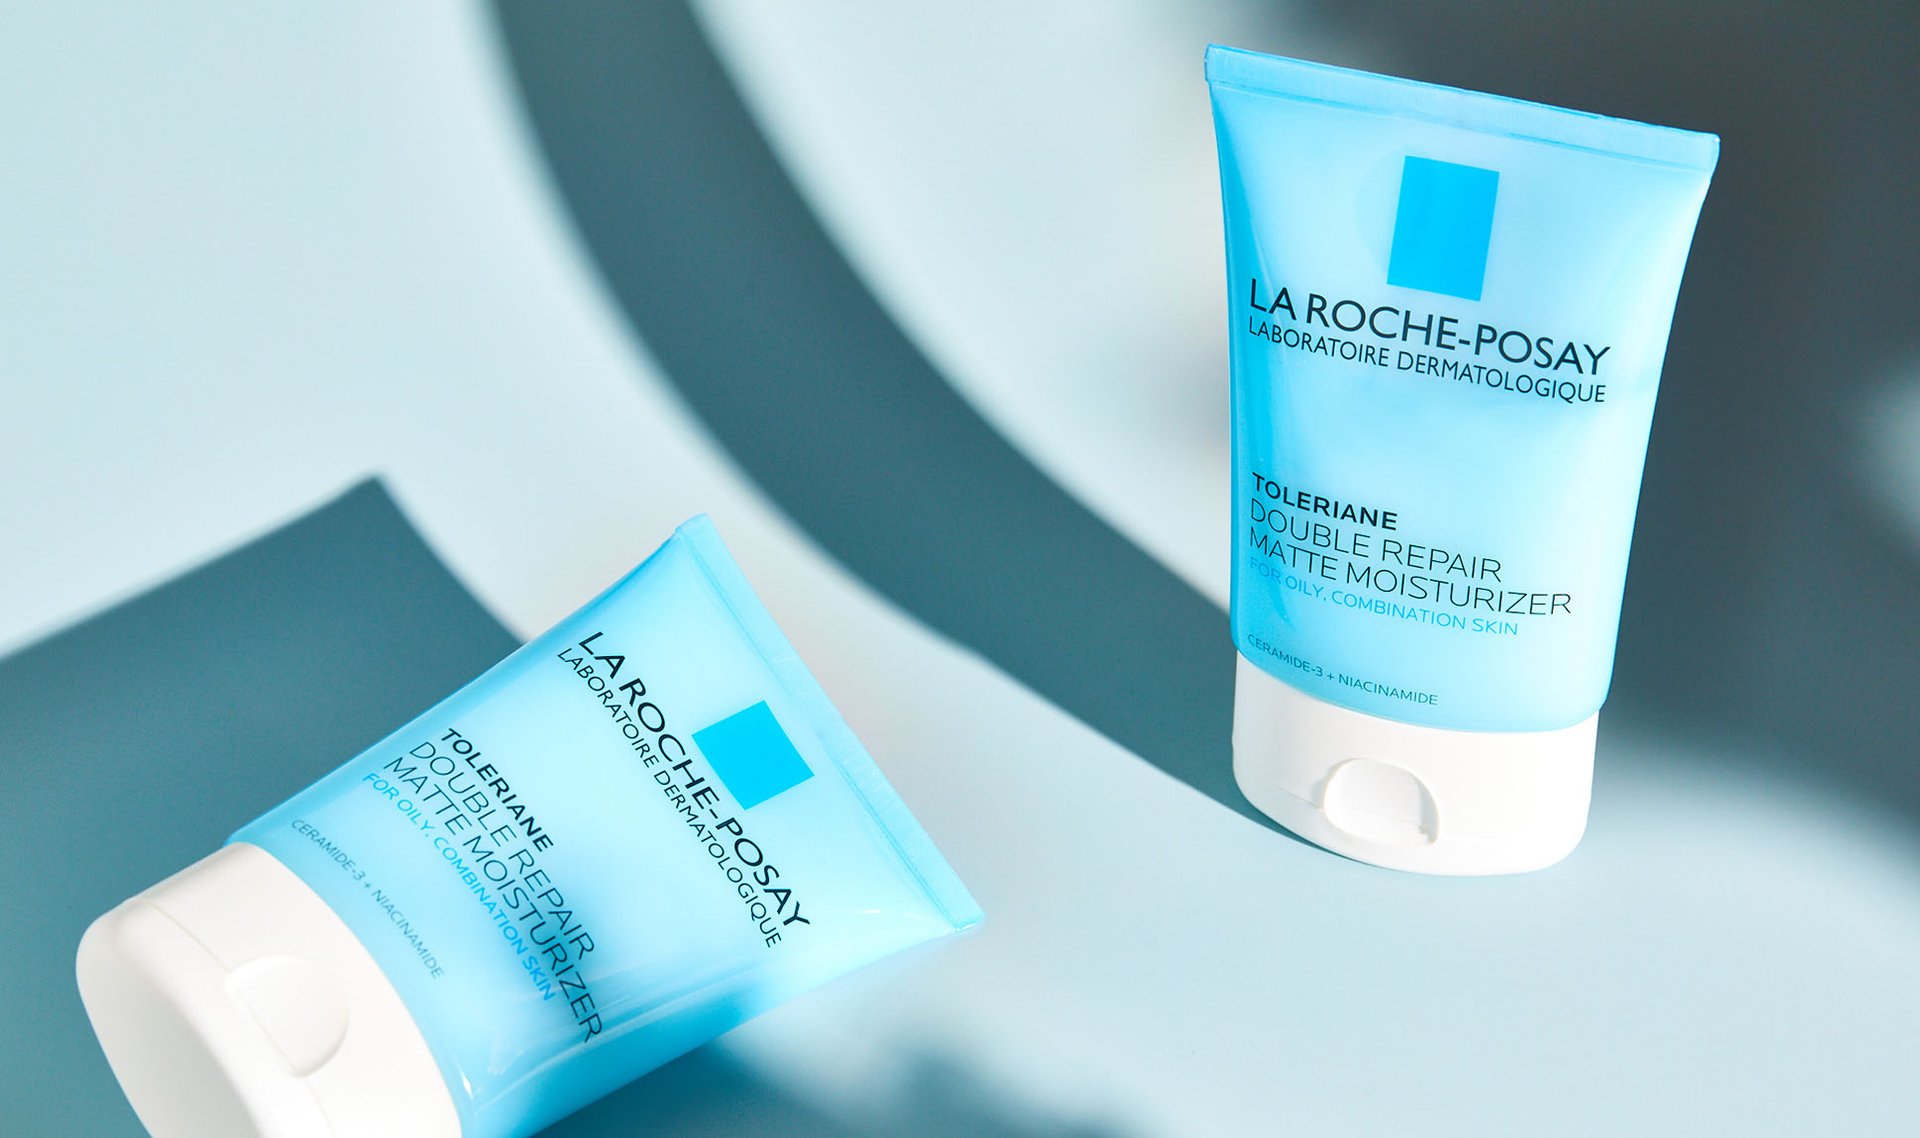 Mattifying Moisturizers That Leave Your Skin Hydrated, Not Greasy